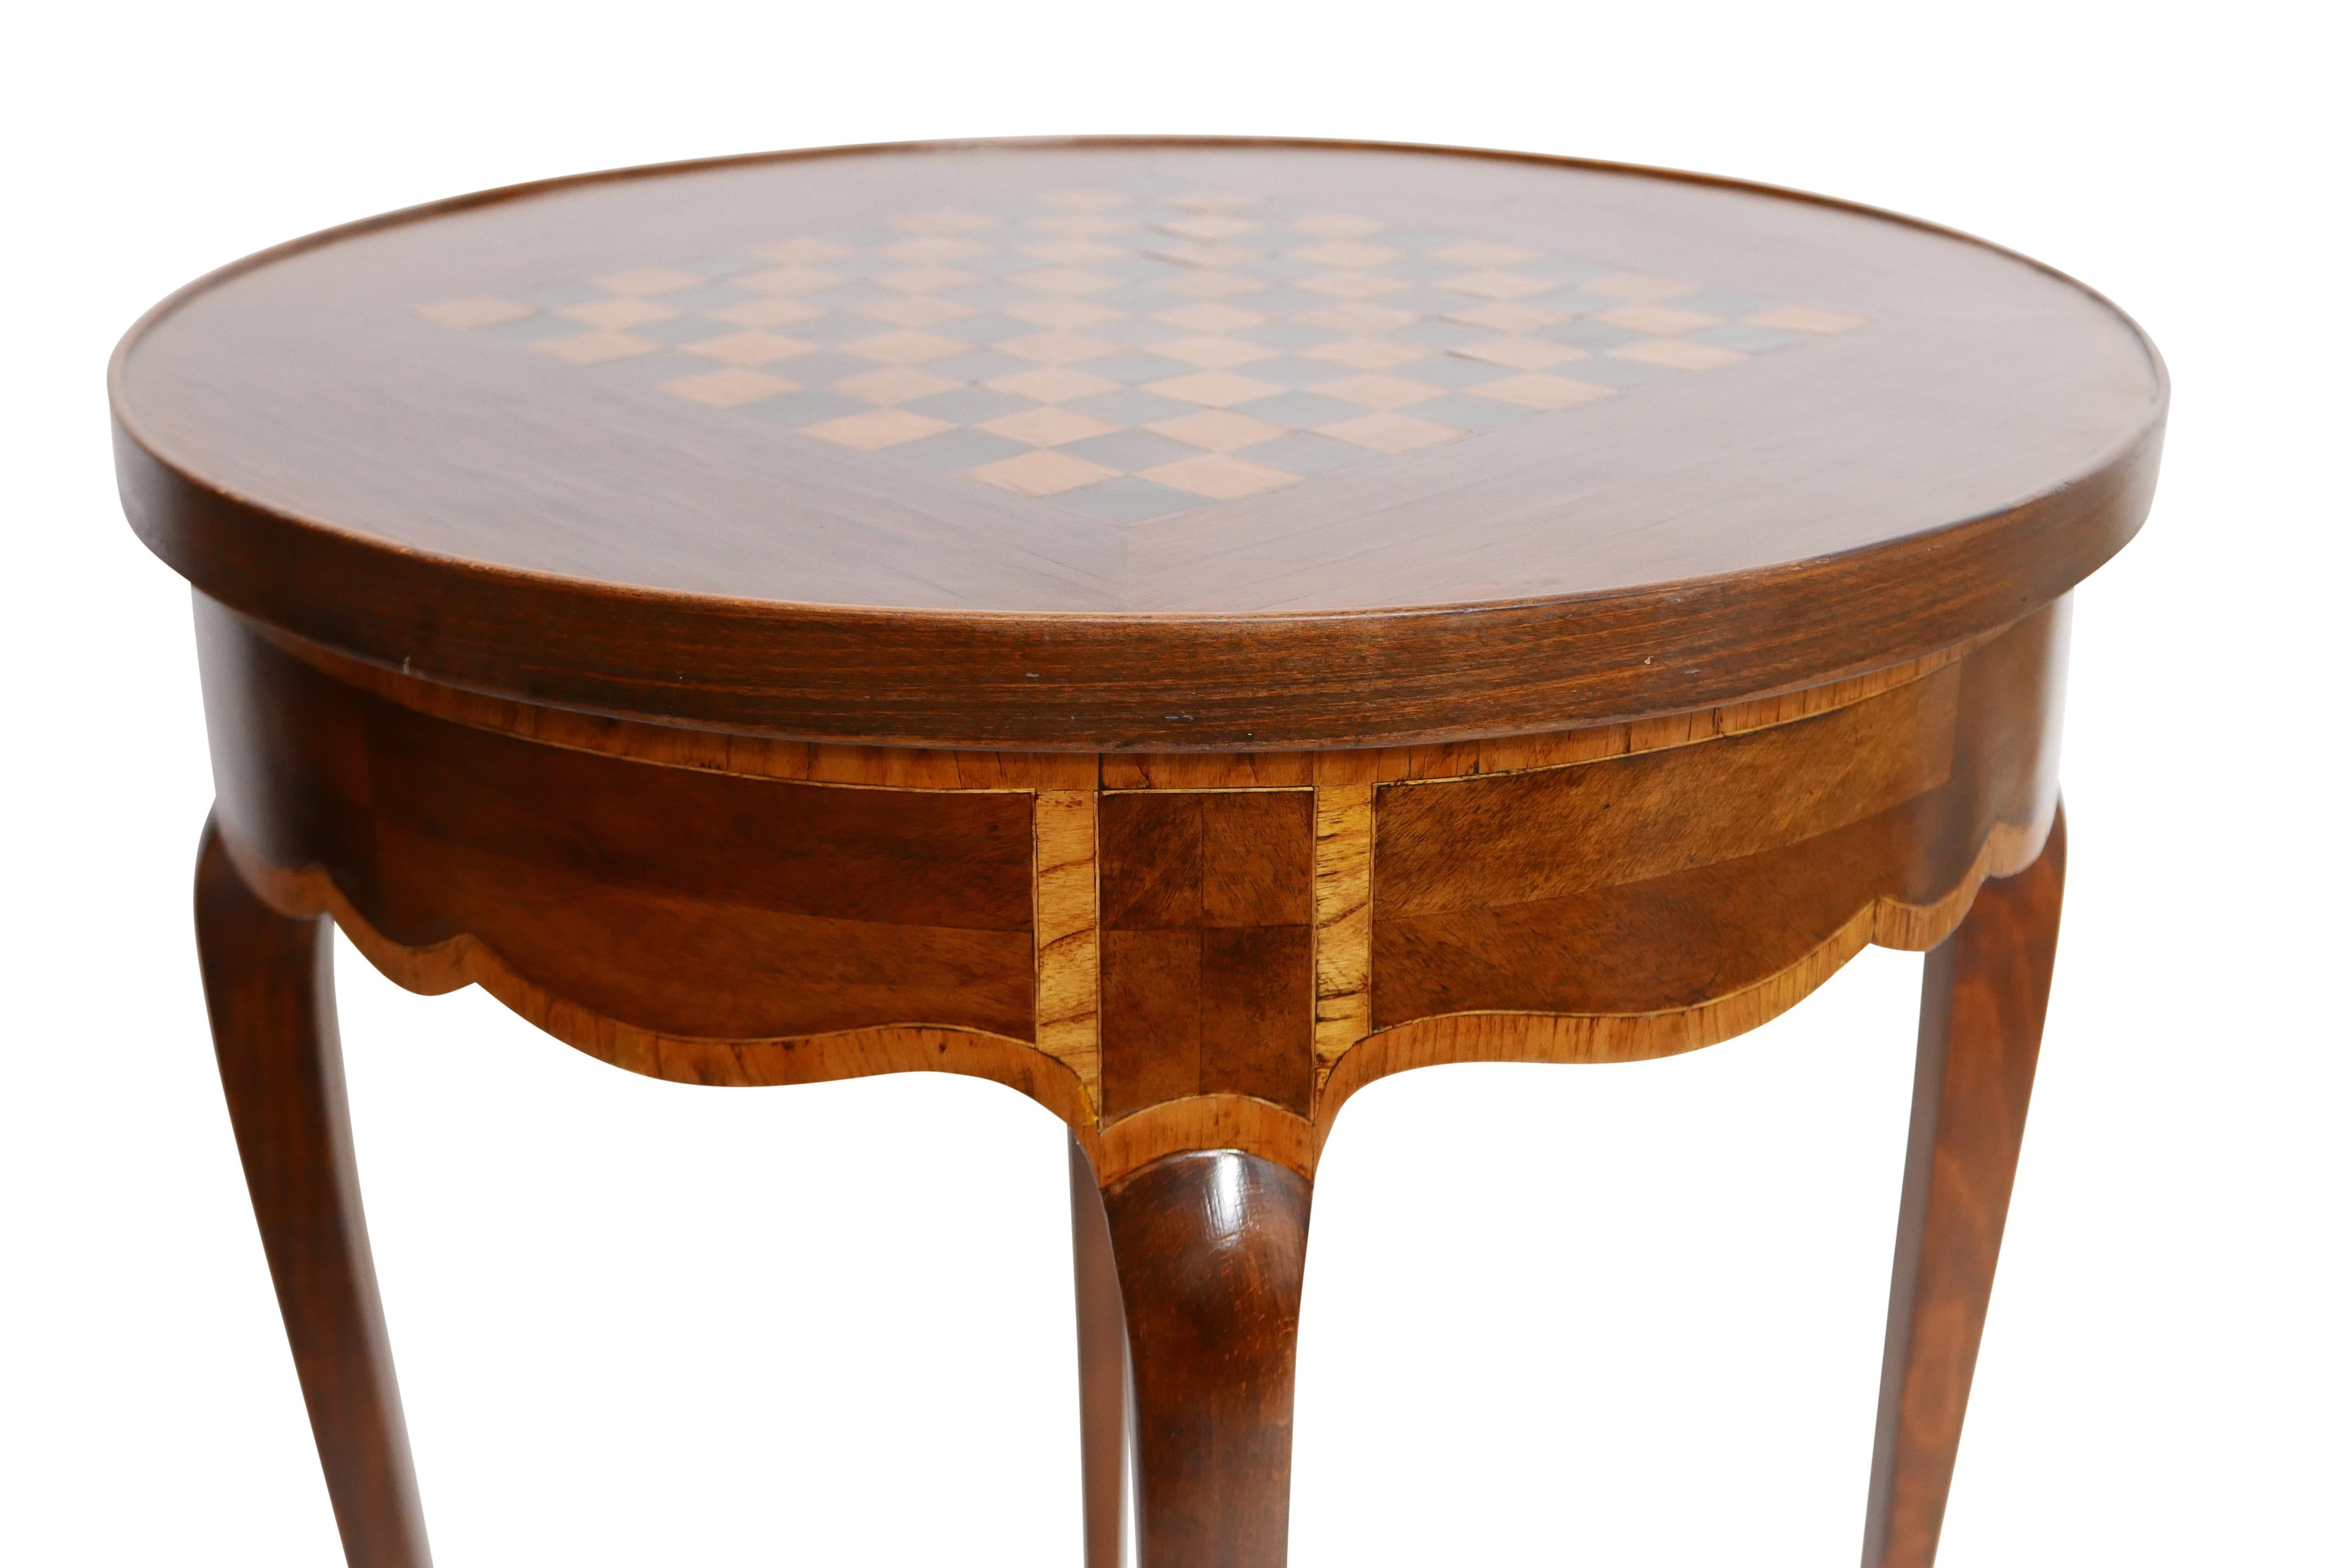 Walnut Circular Tric Trac Game Table with Fruitwood Inlay, Mid-19th Century 2